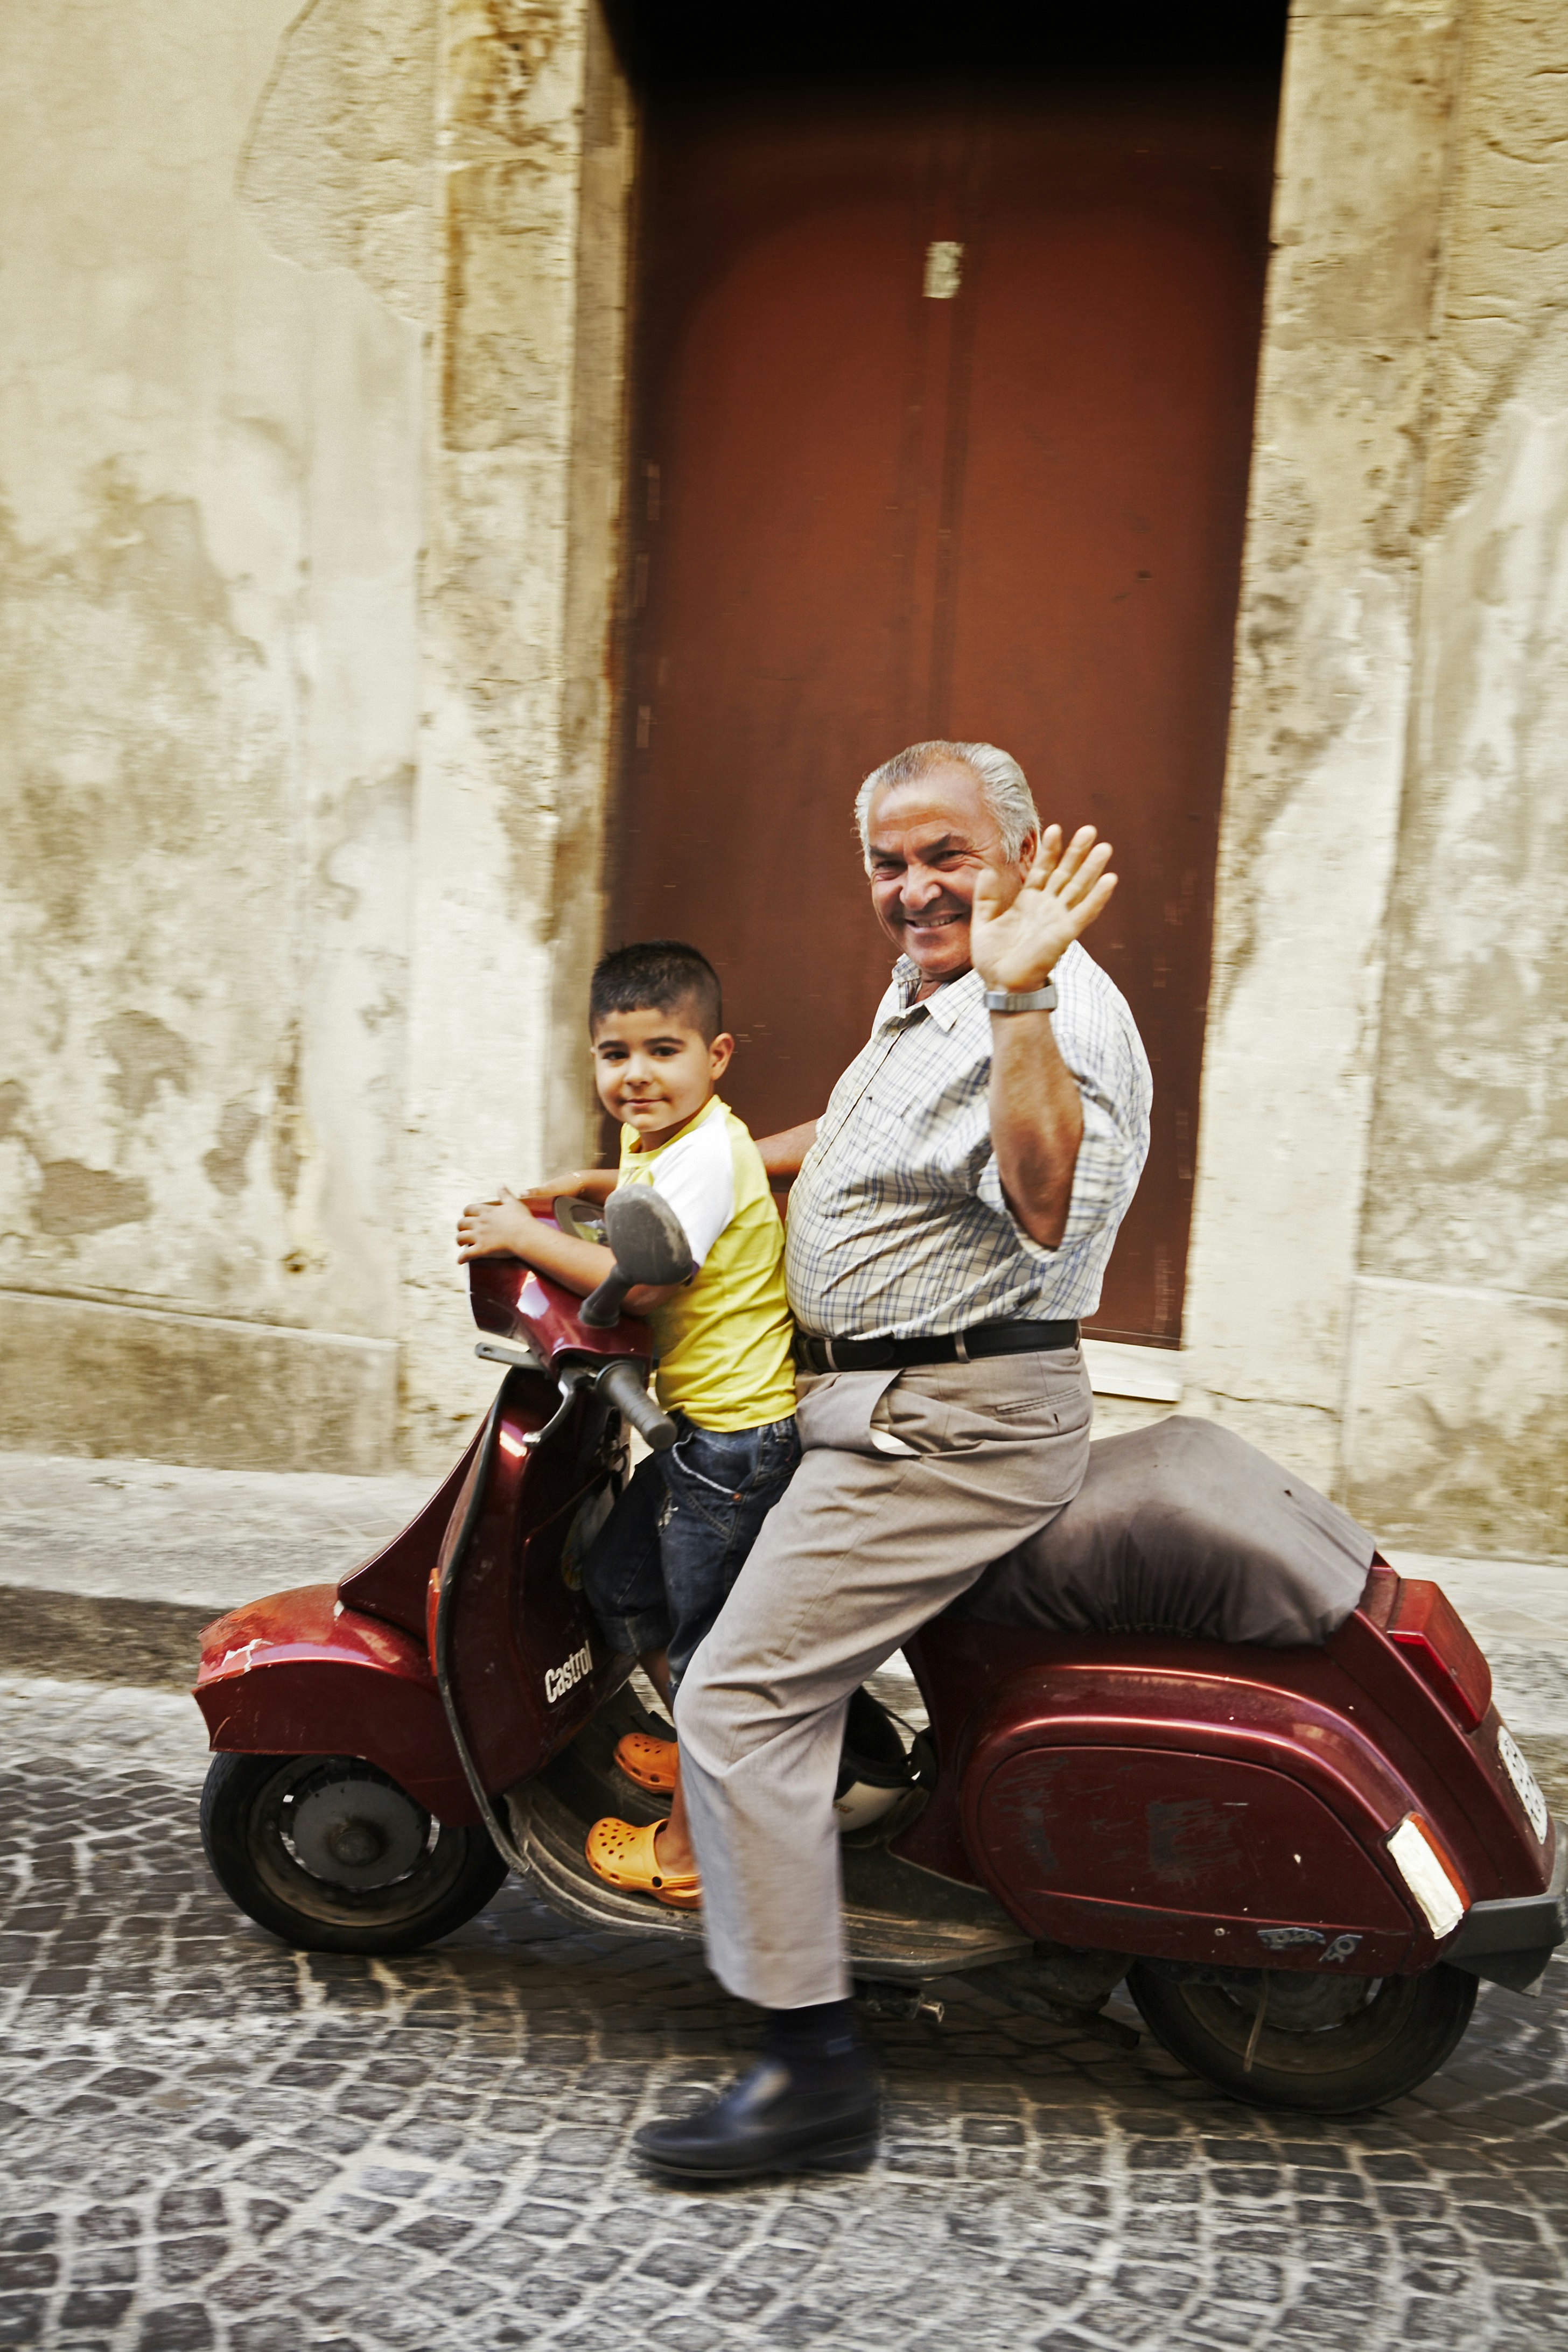 Man with child waving from Vespa motor scooter. The child is wearing orange crocs, shorts nd a yellow t-shirt. He is standing in front of an older man who sits on the scooter, waving at the camera, wearing a checked shirt and beige slacks. 